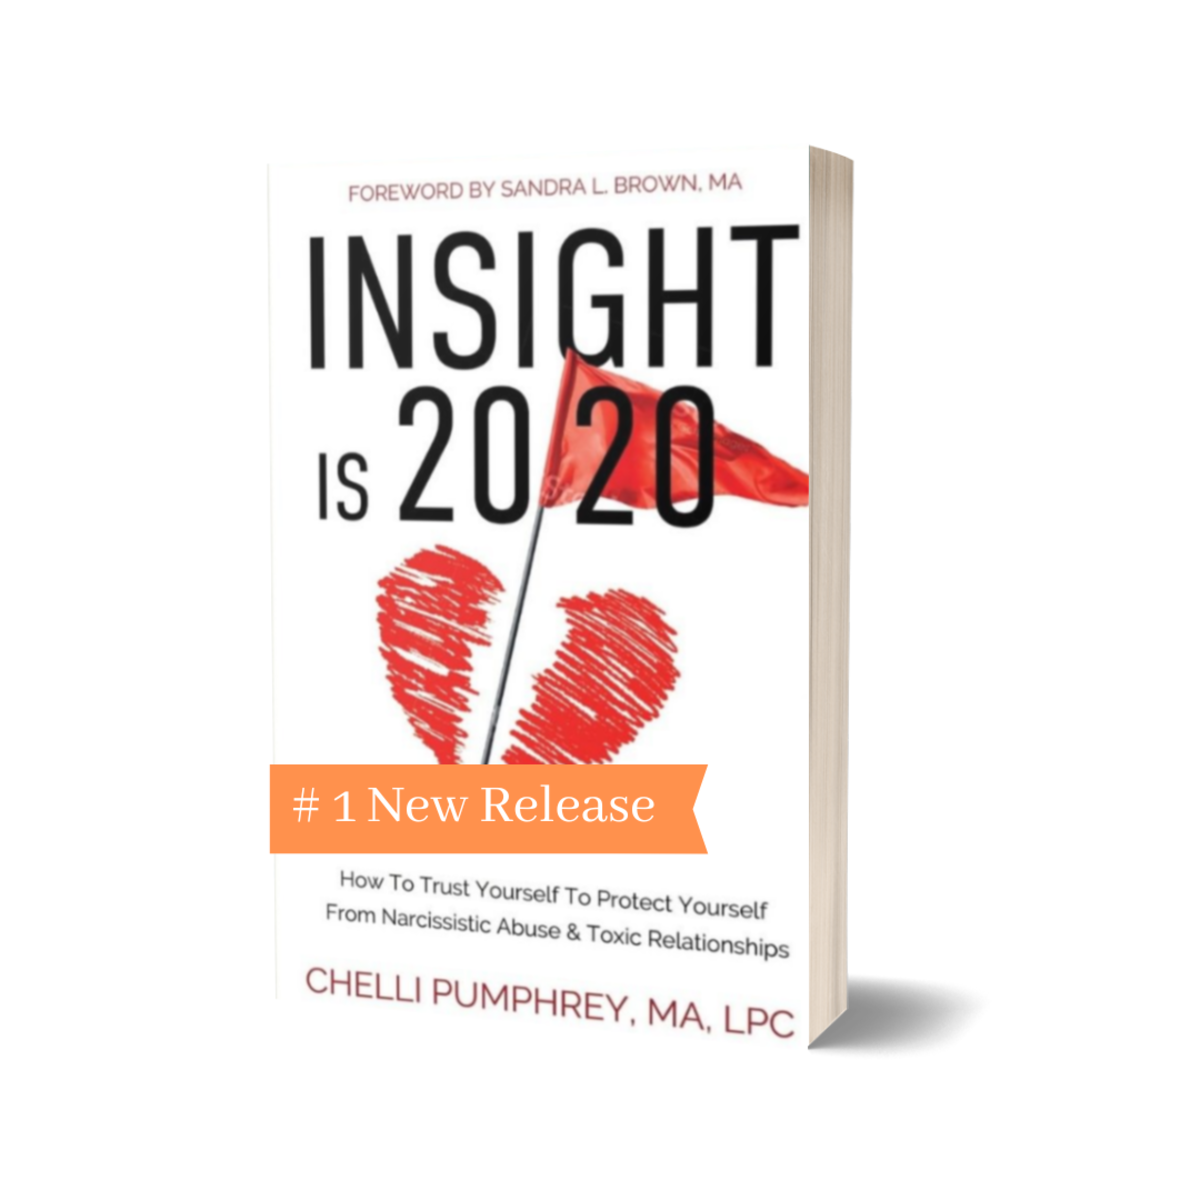 Book Review: Insight 20/20: How To Trust Yourself To Protect Yourself from Narcissistic Abuse & Toxic Relationships